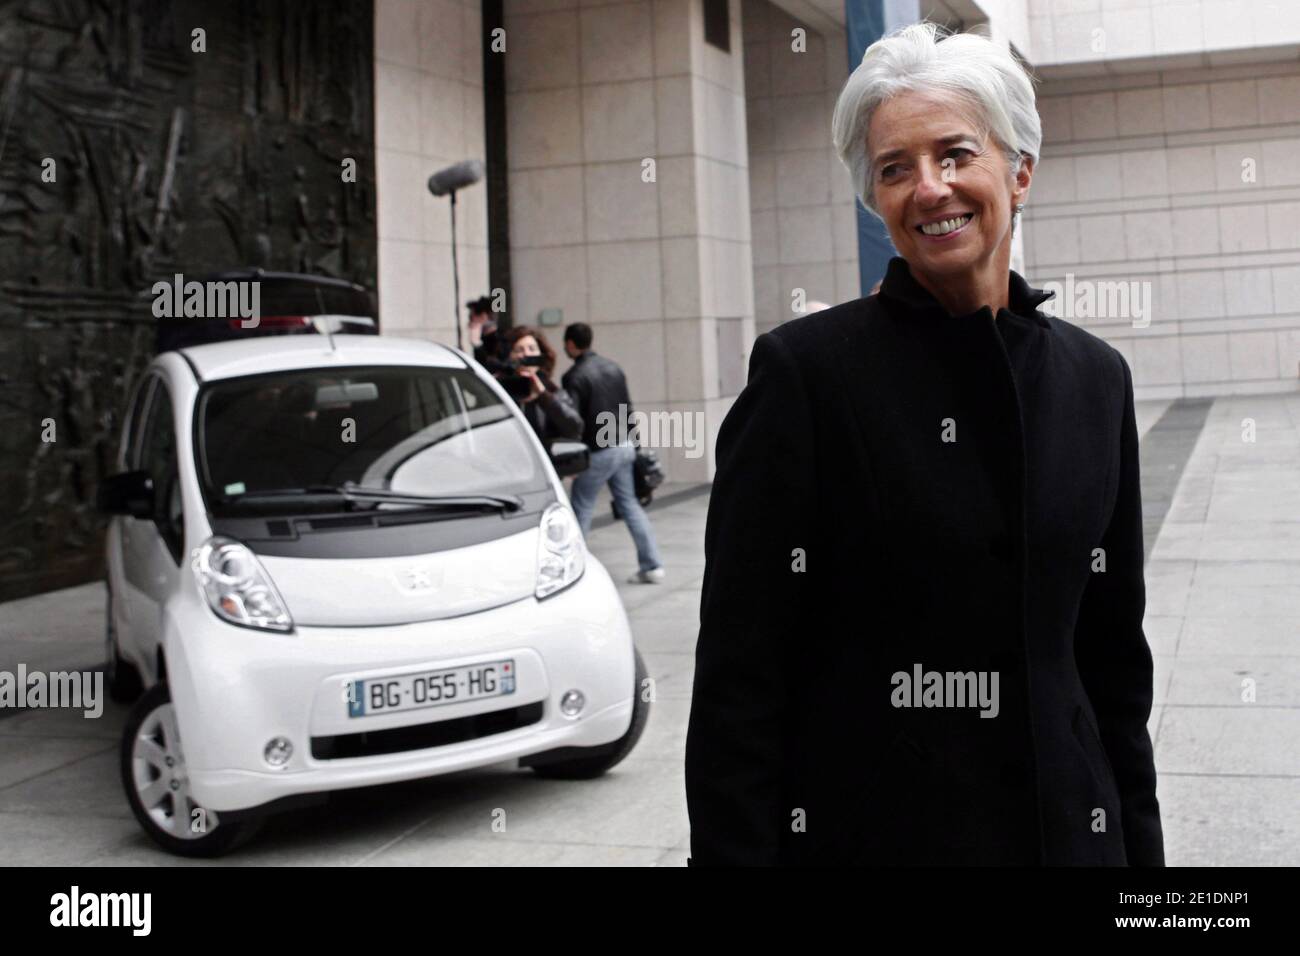 French Minister for the Economy, Finance and Industry Christine Lagarde poses as she drives an Ion Peugeot full electric car, in Paris, France, on January 20, 2011. The Economy ministry will use the four seat four-door city ion car, launched at the end of 2010. Photo by Stephane Lemouton/ABACAPRESS.COM Stock Photo